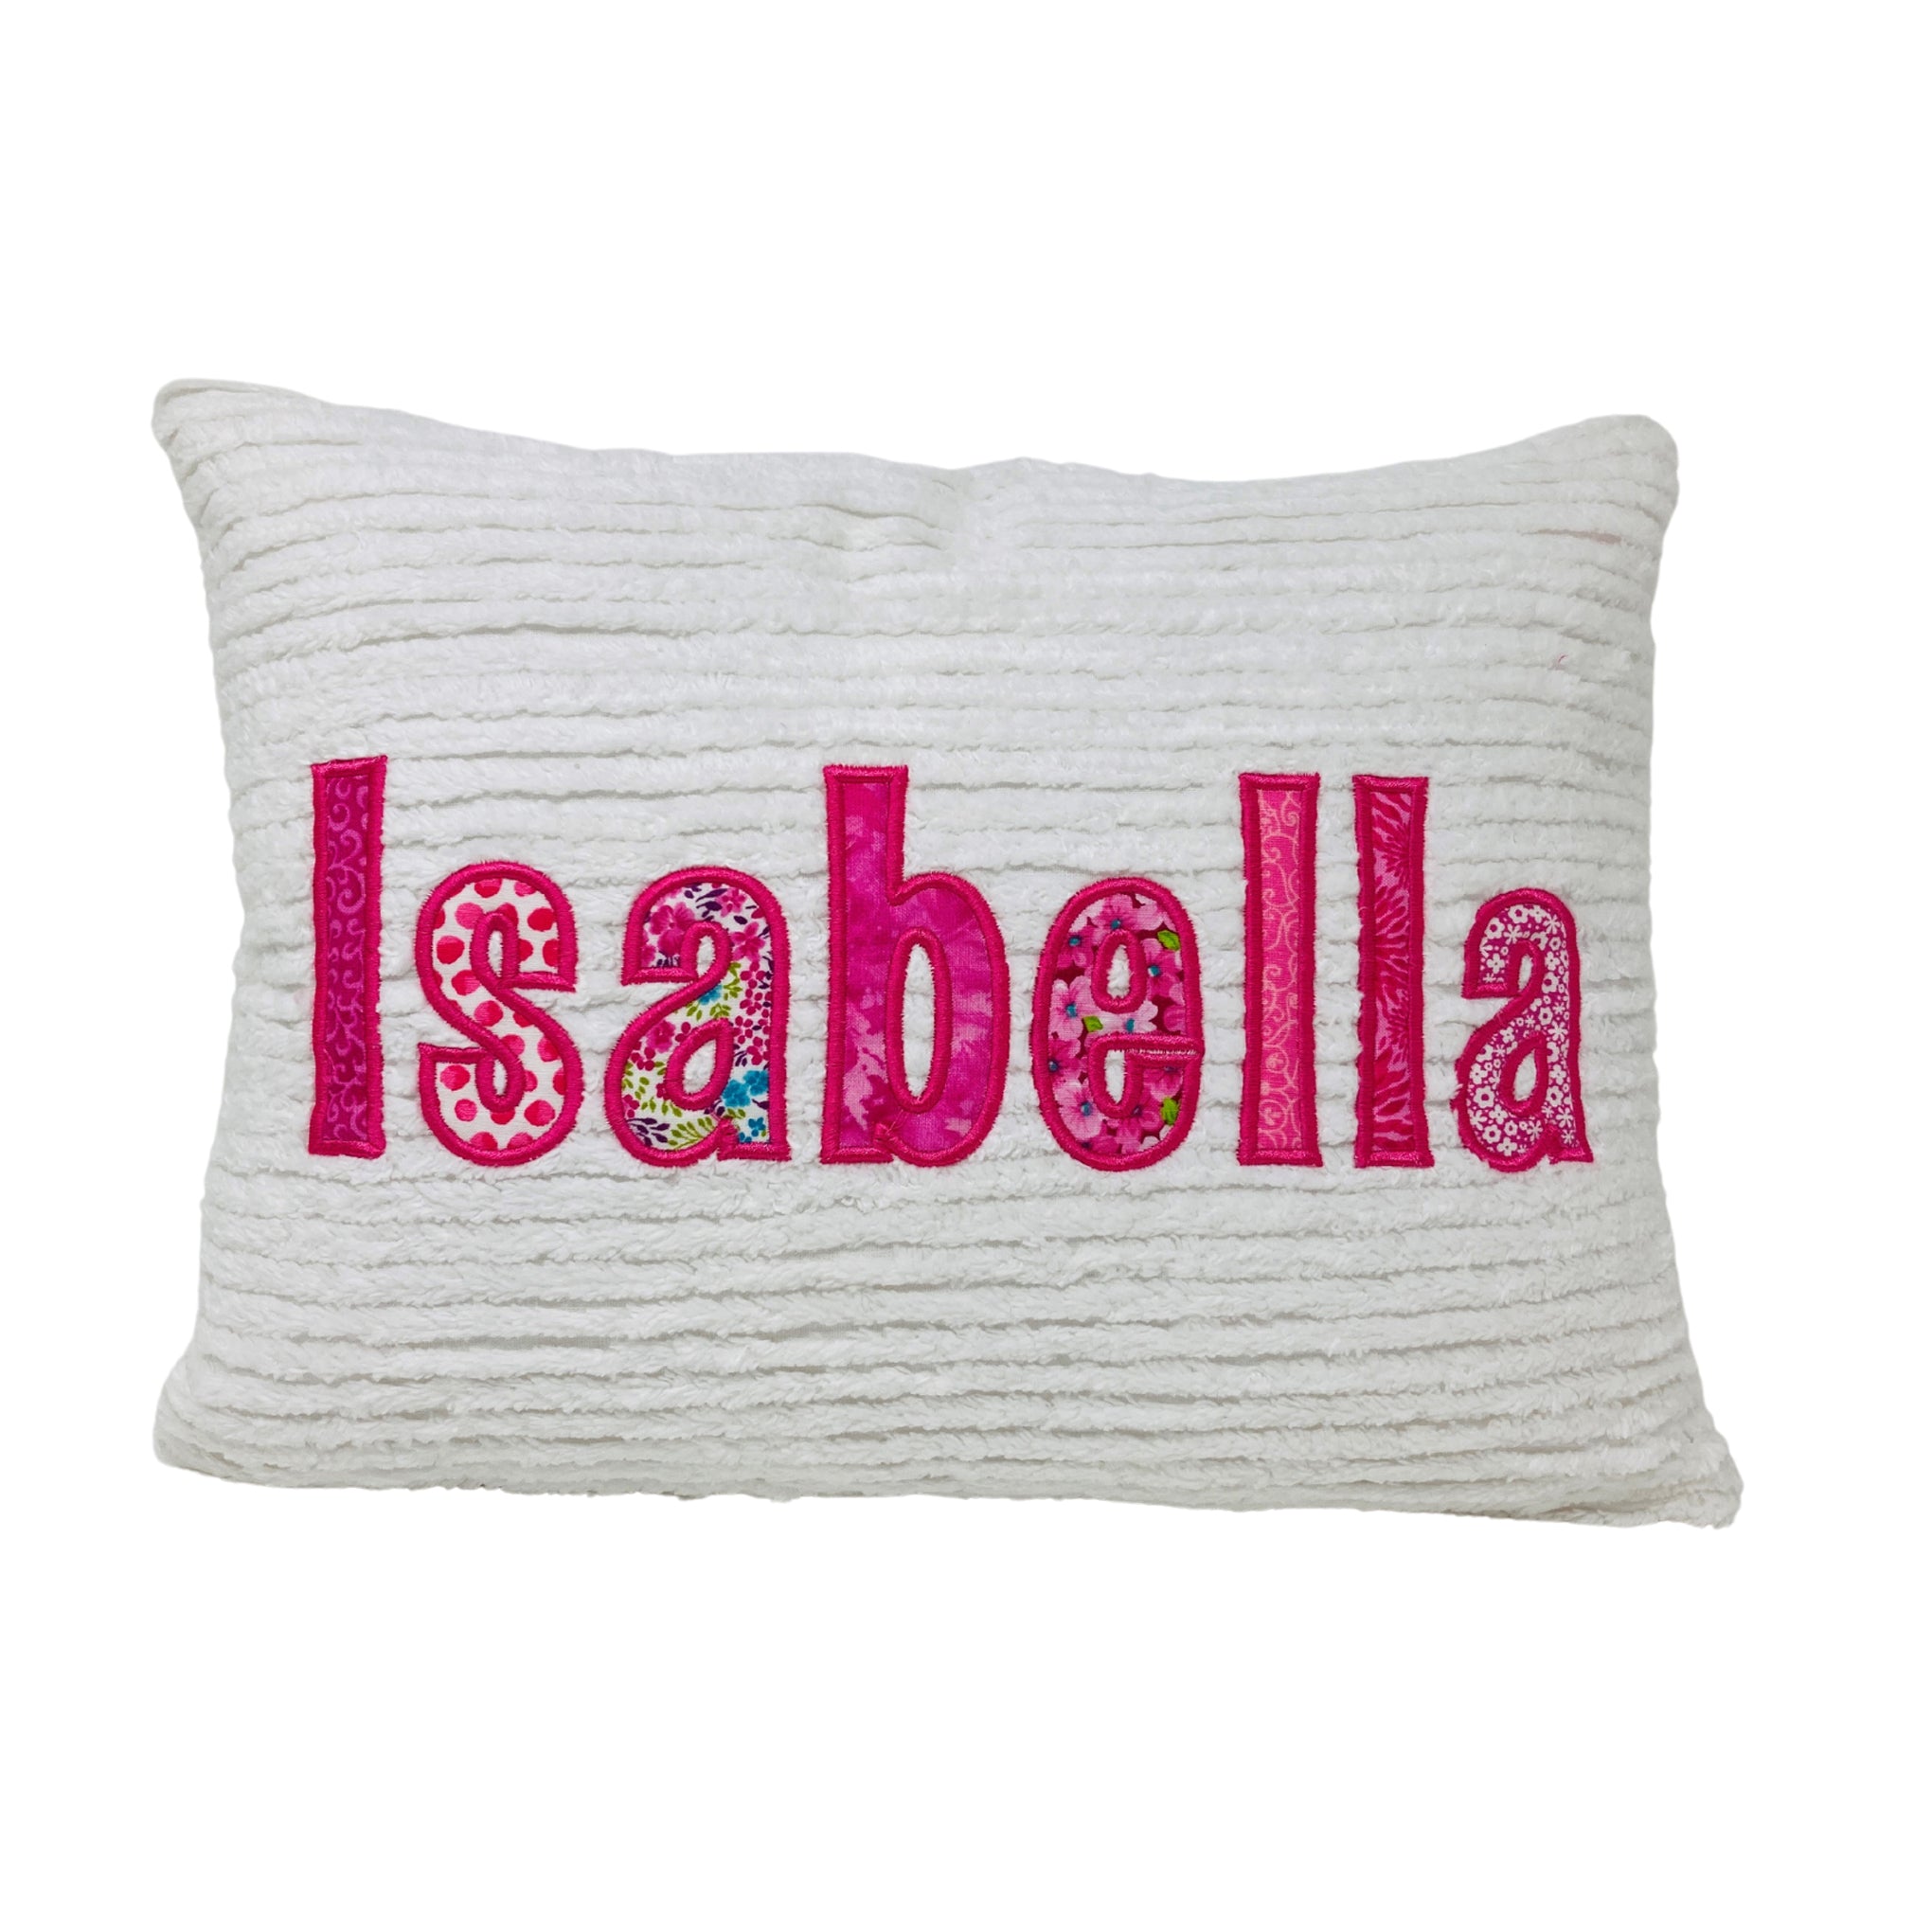 Personalized throw pillow for girls - white chenille fabrics with bright pink applique name